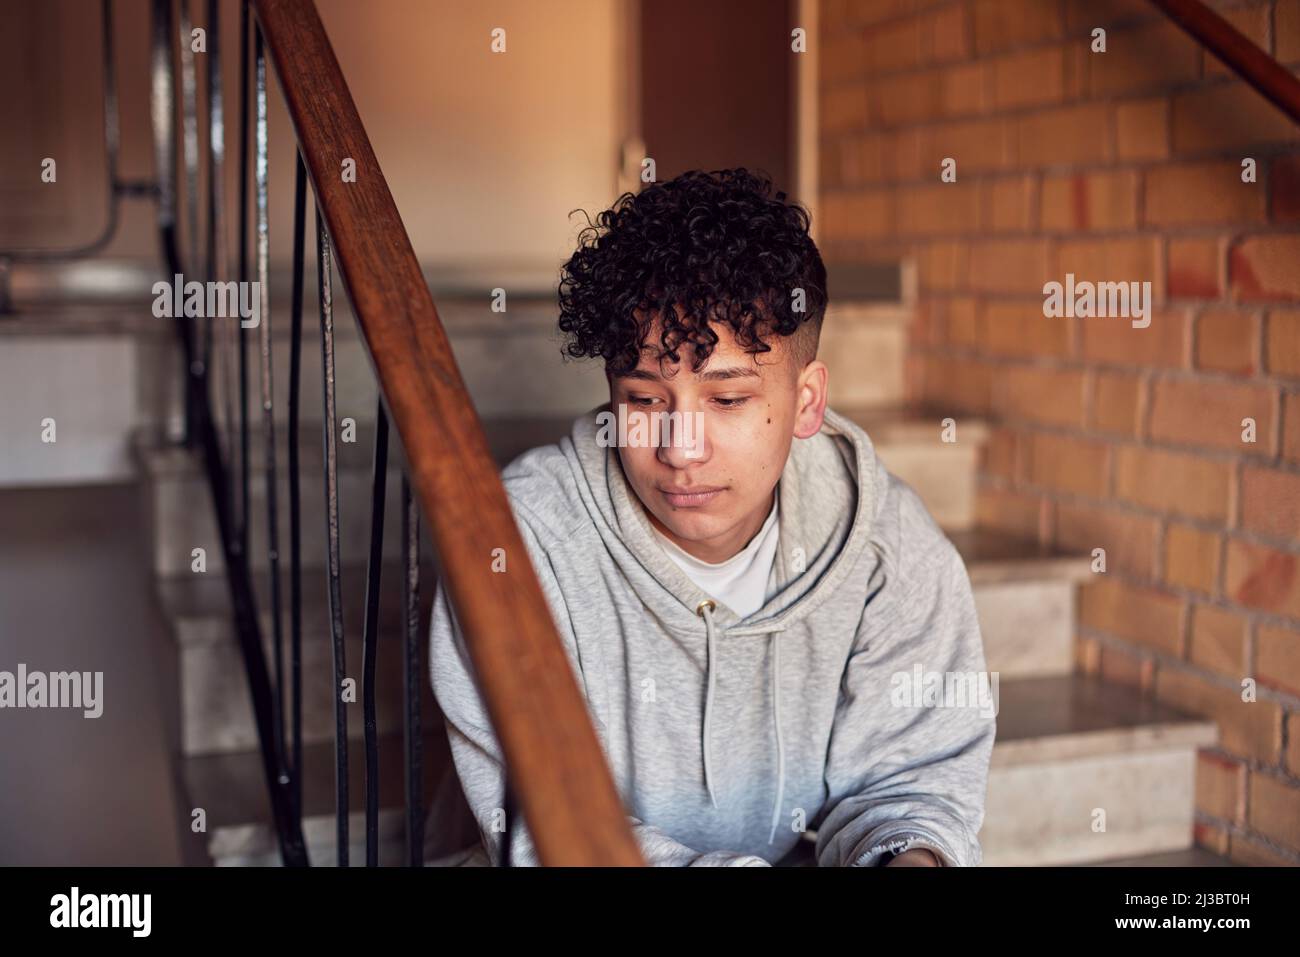 Boy sitting on stairs in residential building Stock Photo